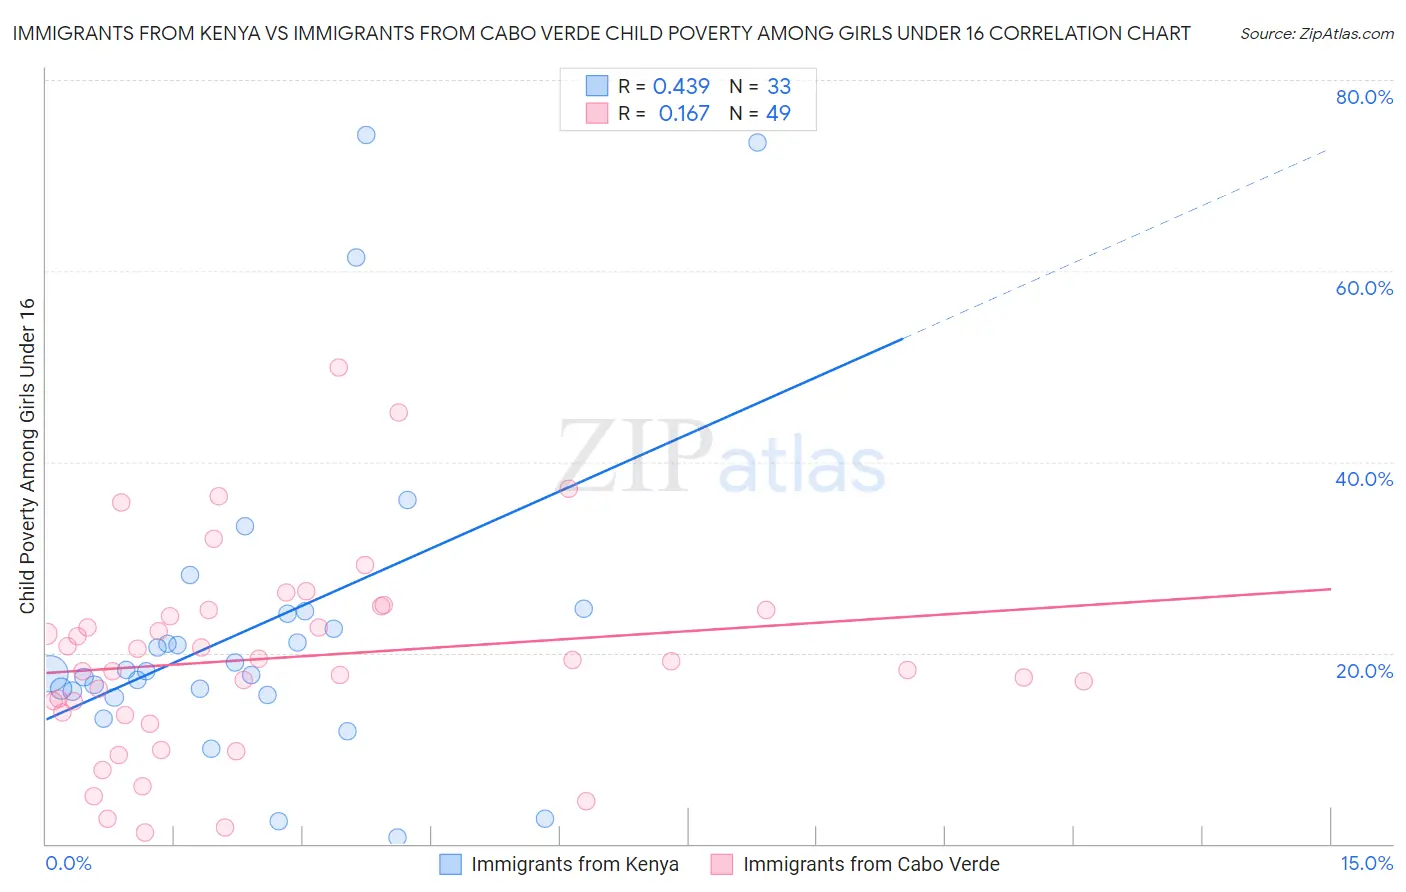 Immigrants from Kenya vs Immigrants from Cabo Verde Child Poverty Among Girls Under 16